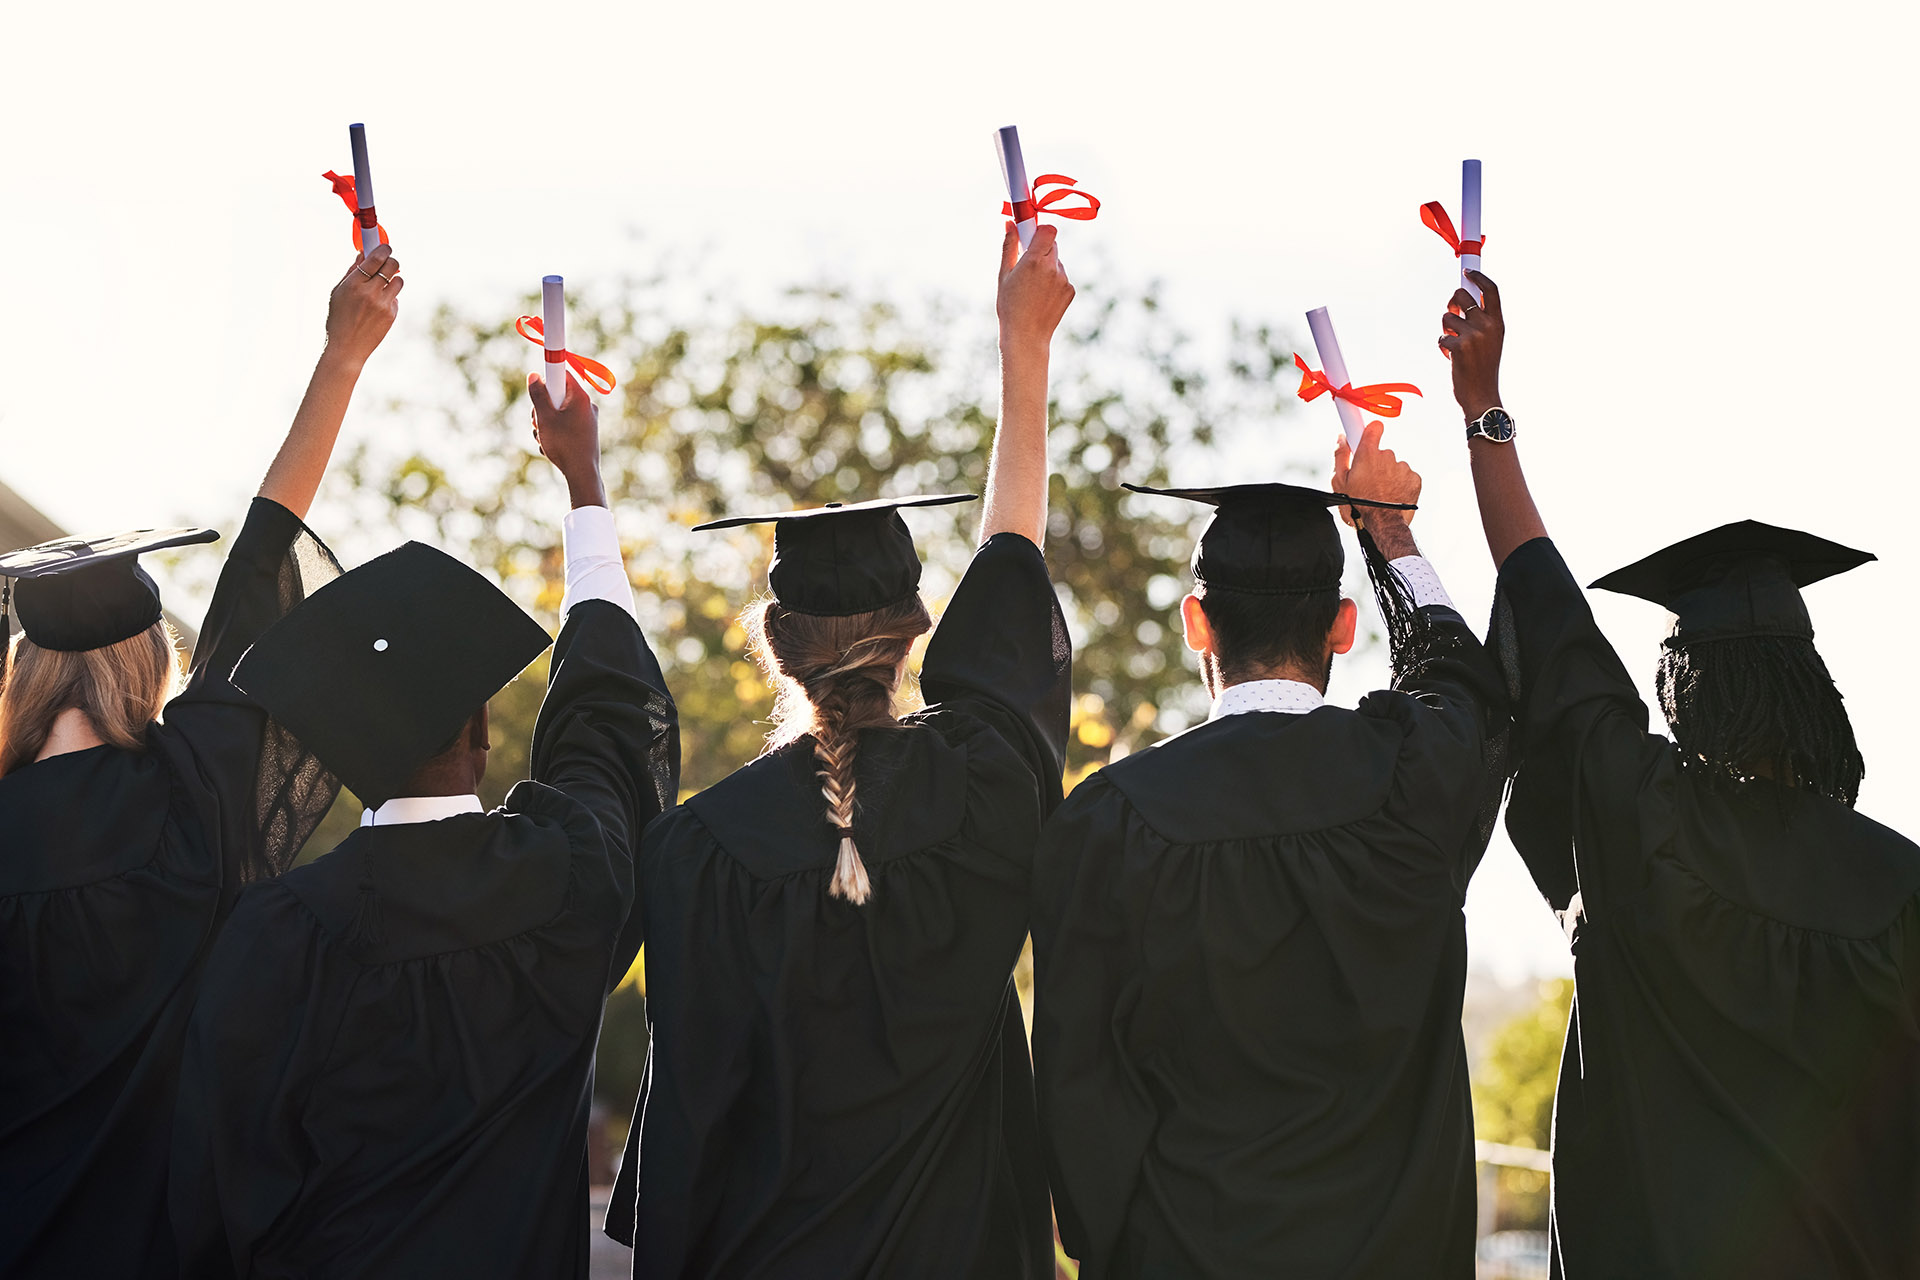 Group of students in graduation caps and gowns holding diplomas outdoors.